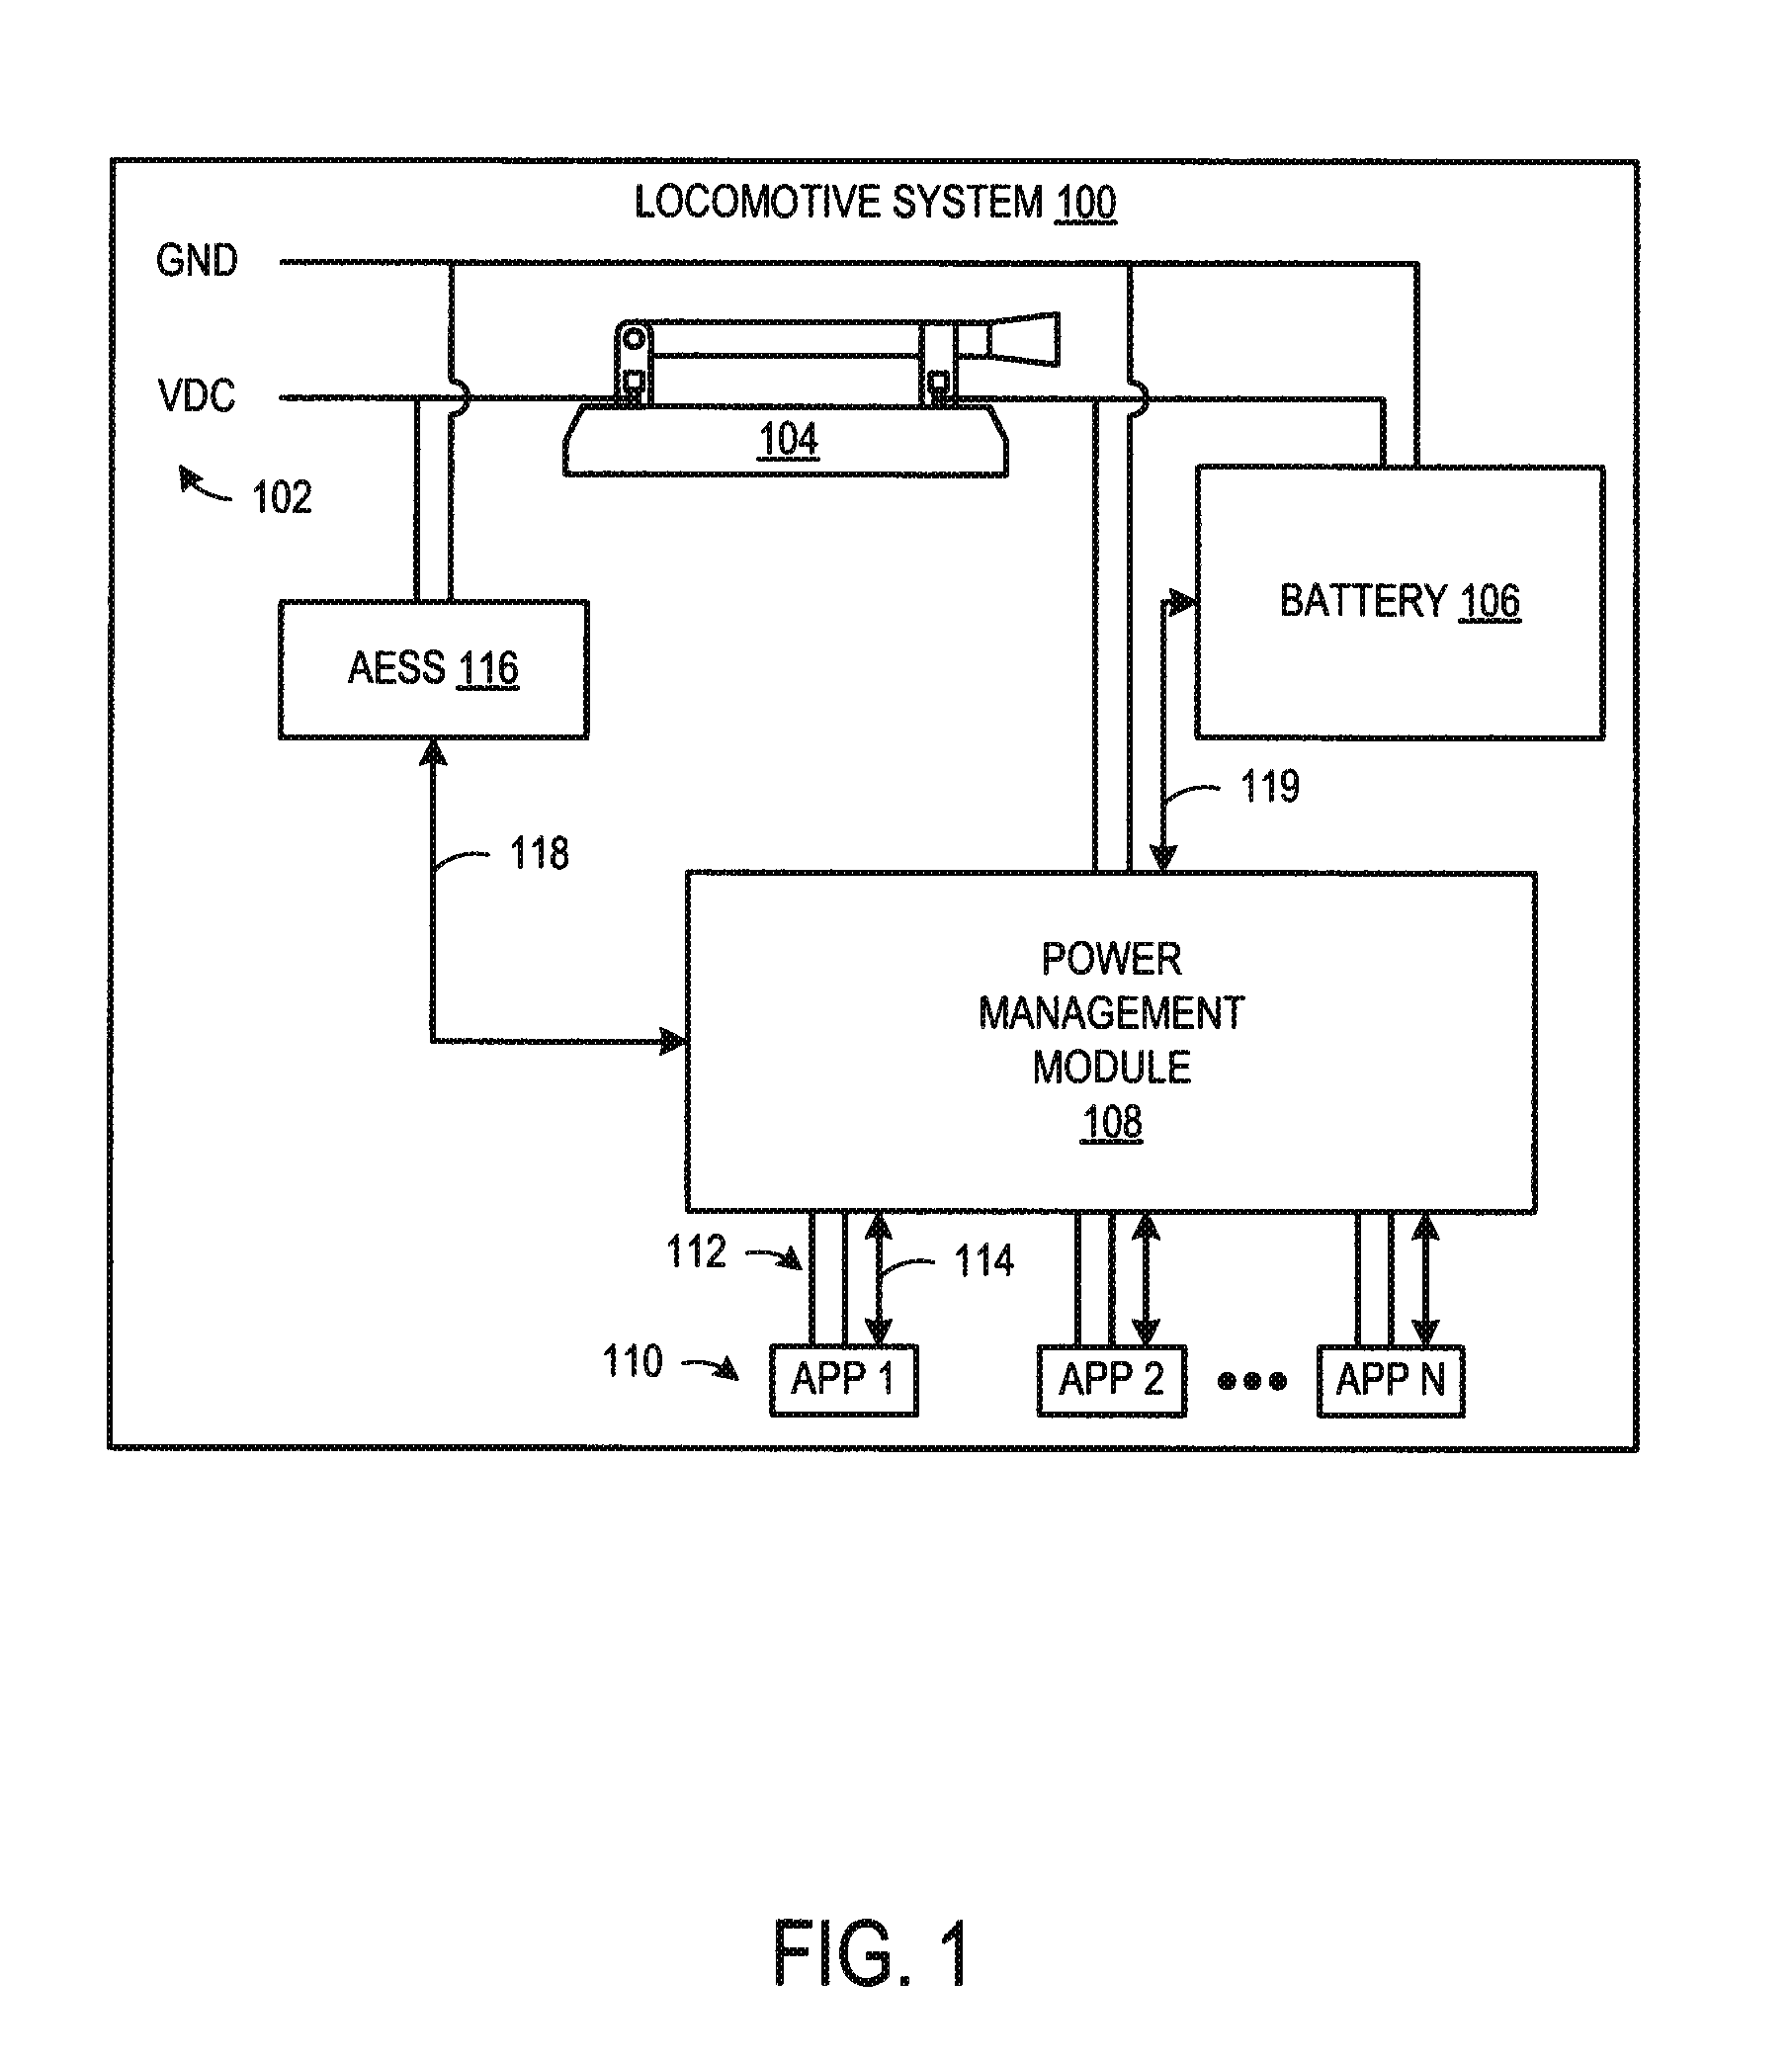 Method and system for rail vehicle power distribution and management